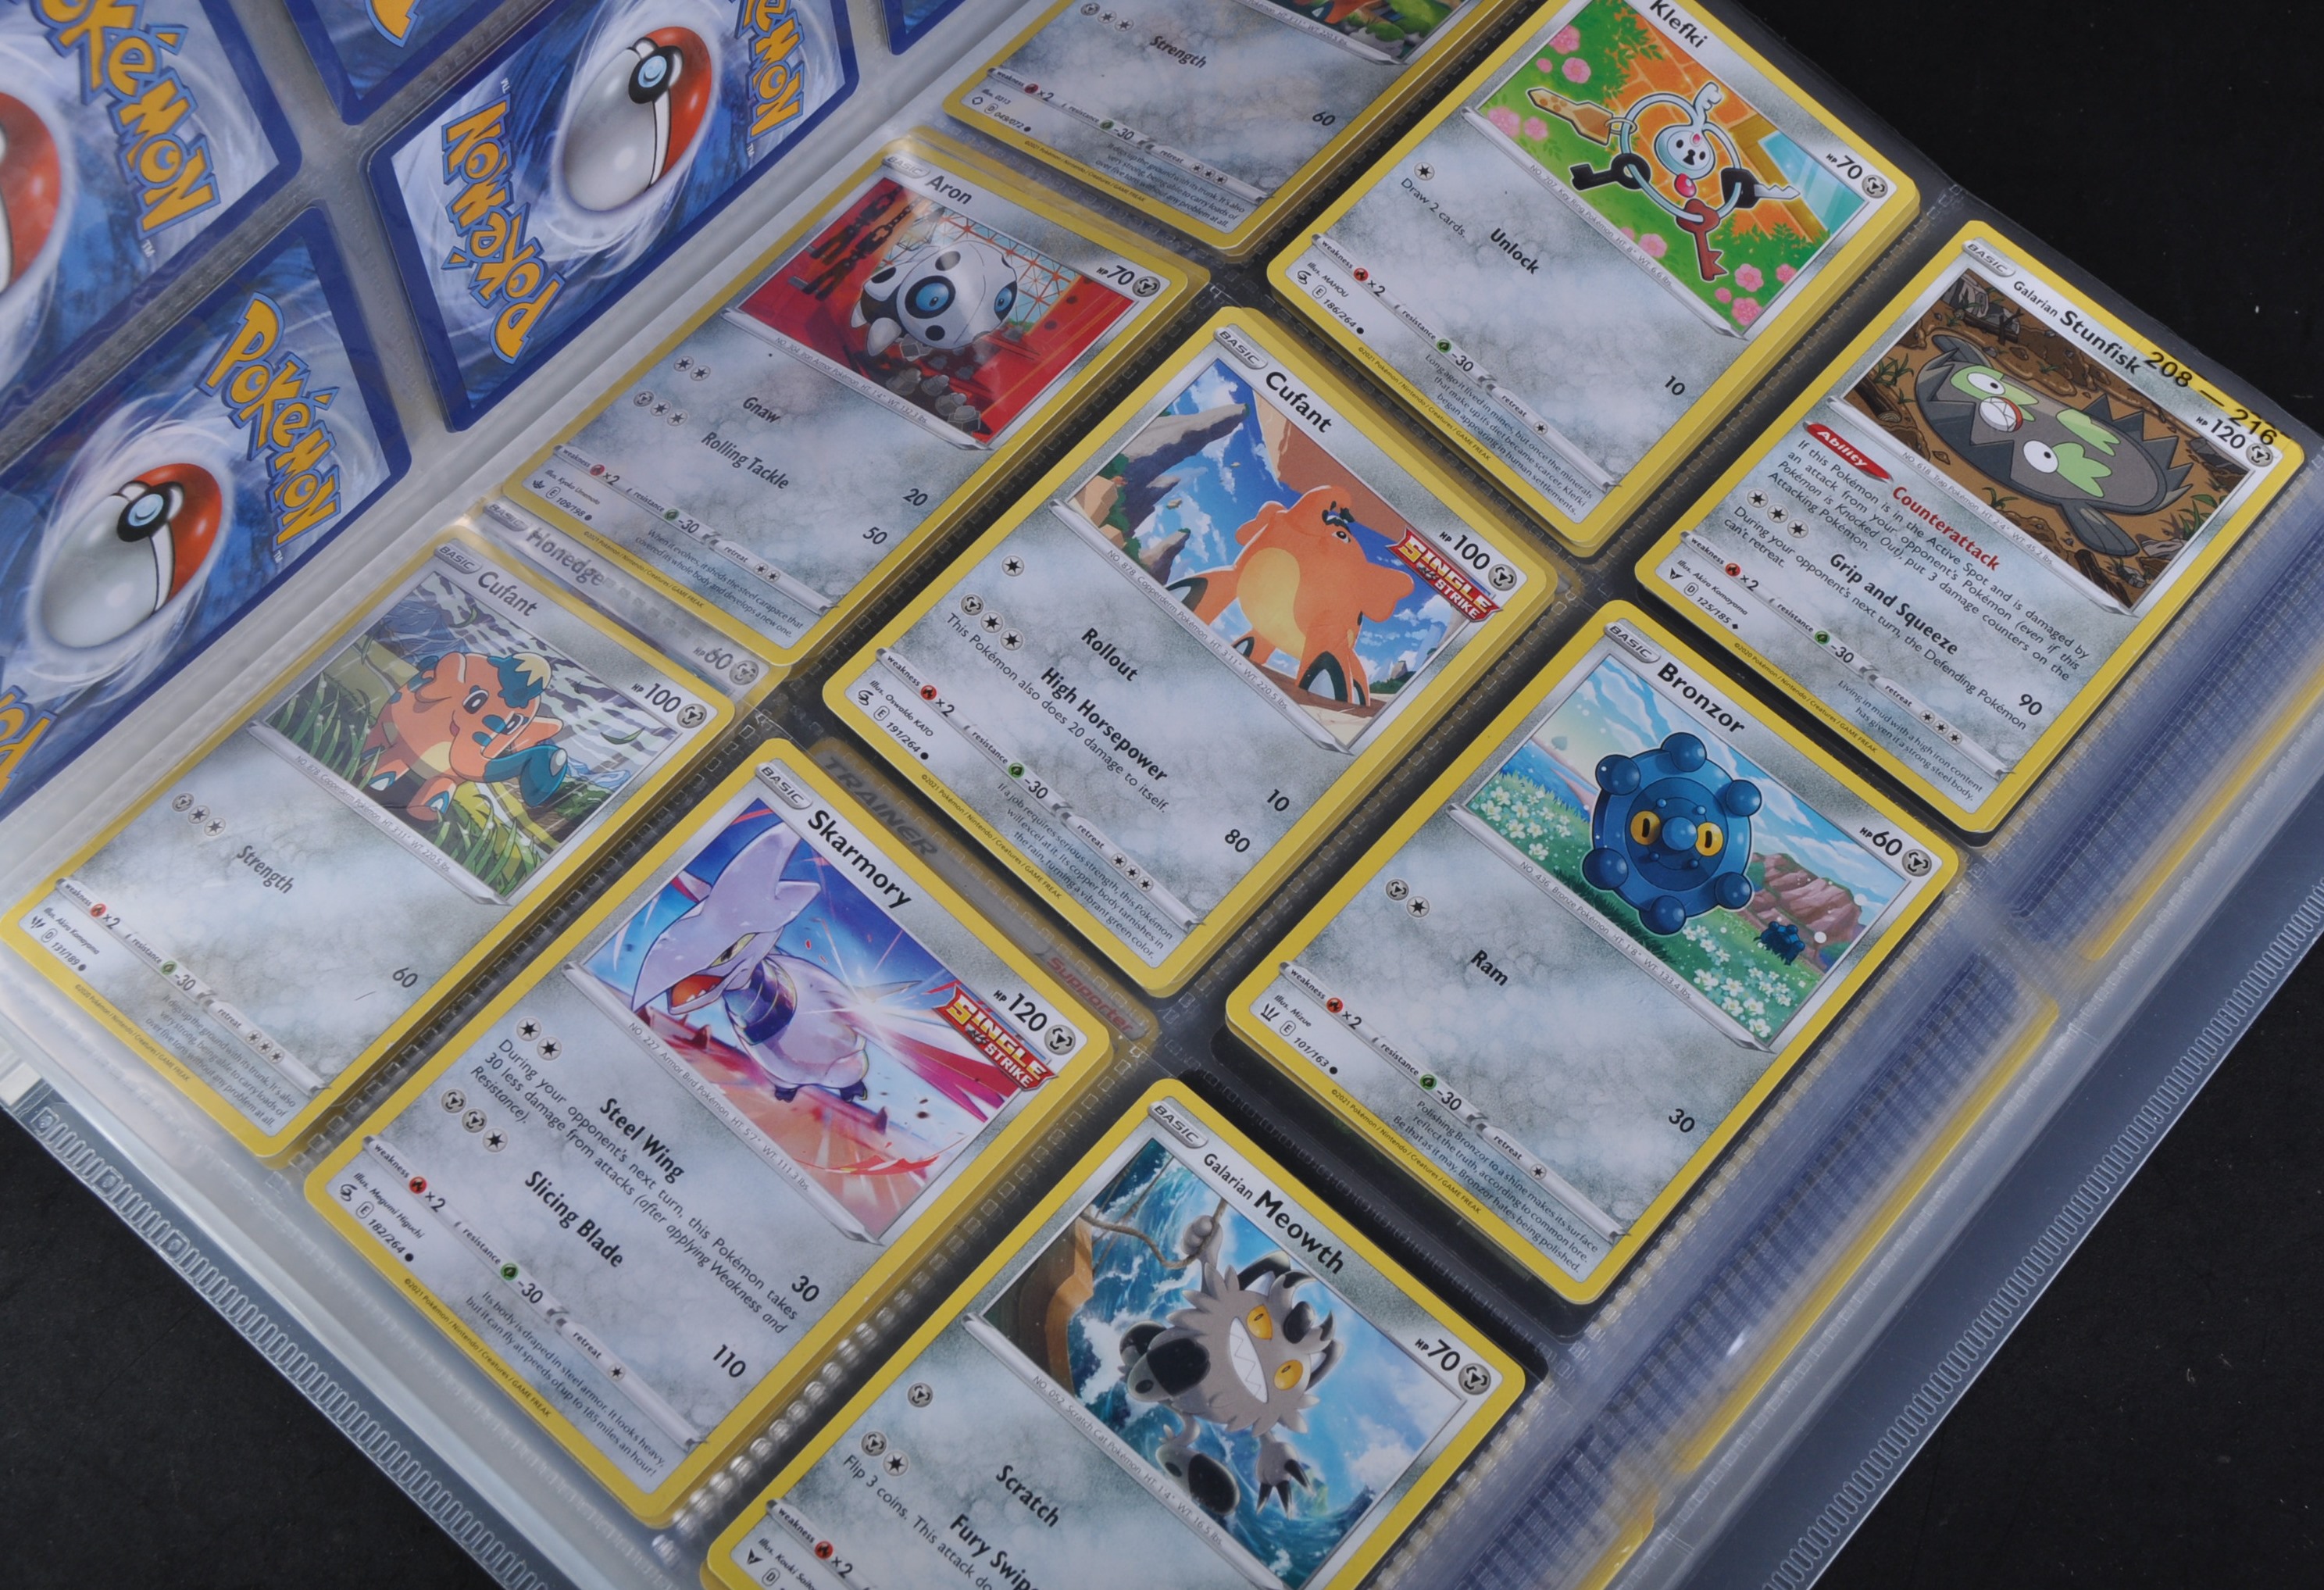 POKEMON TRADING CARD GAME - LARGE COLLECTION OF ASSORTED 2020/21 POKEMON CARDS - Image 6 of 10